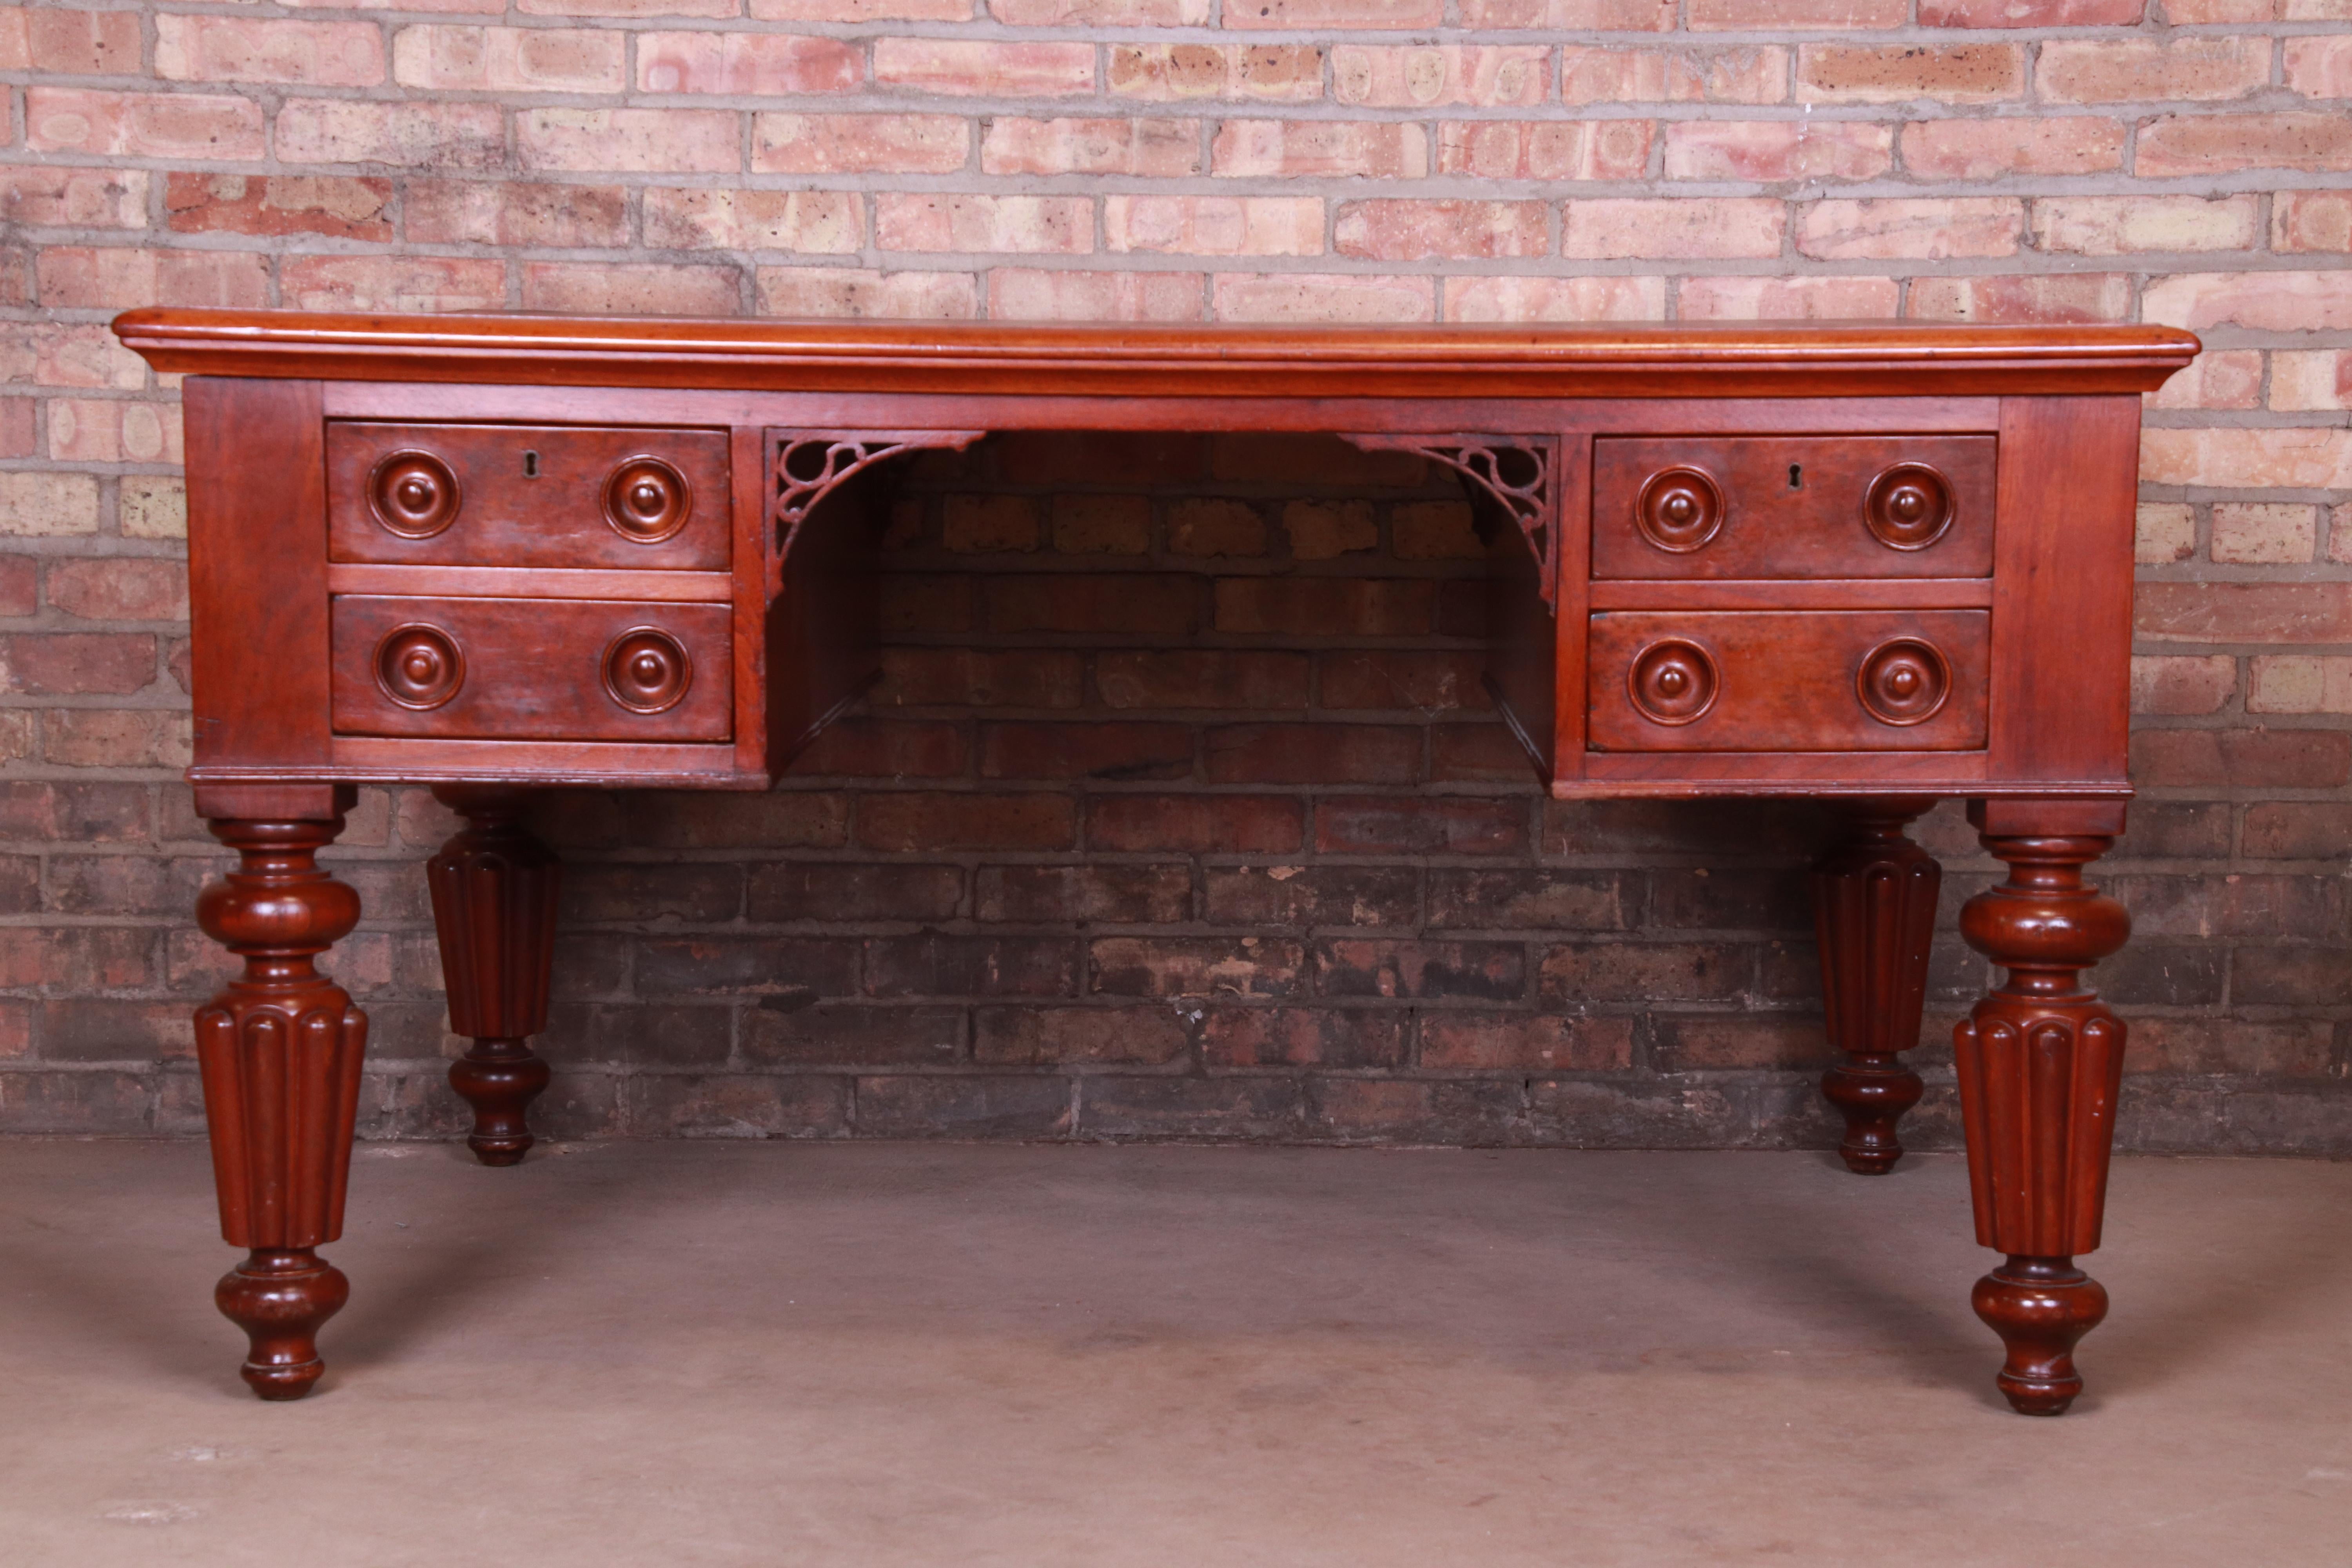 An exceptional antique English leather top executive partner desk

England, circa 1850

Mahogany, with burl wood drawer fronts and leather top.

Measures: 56.13